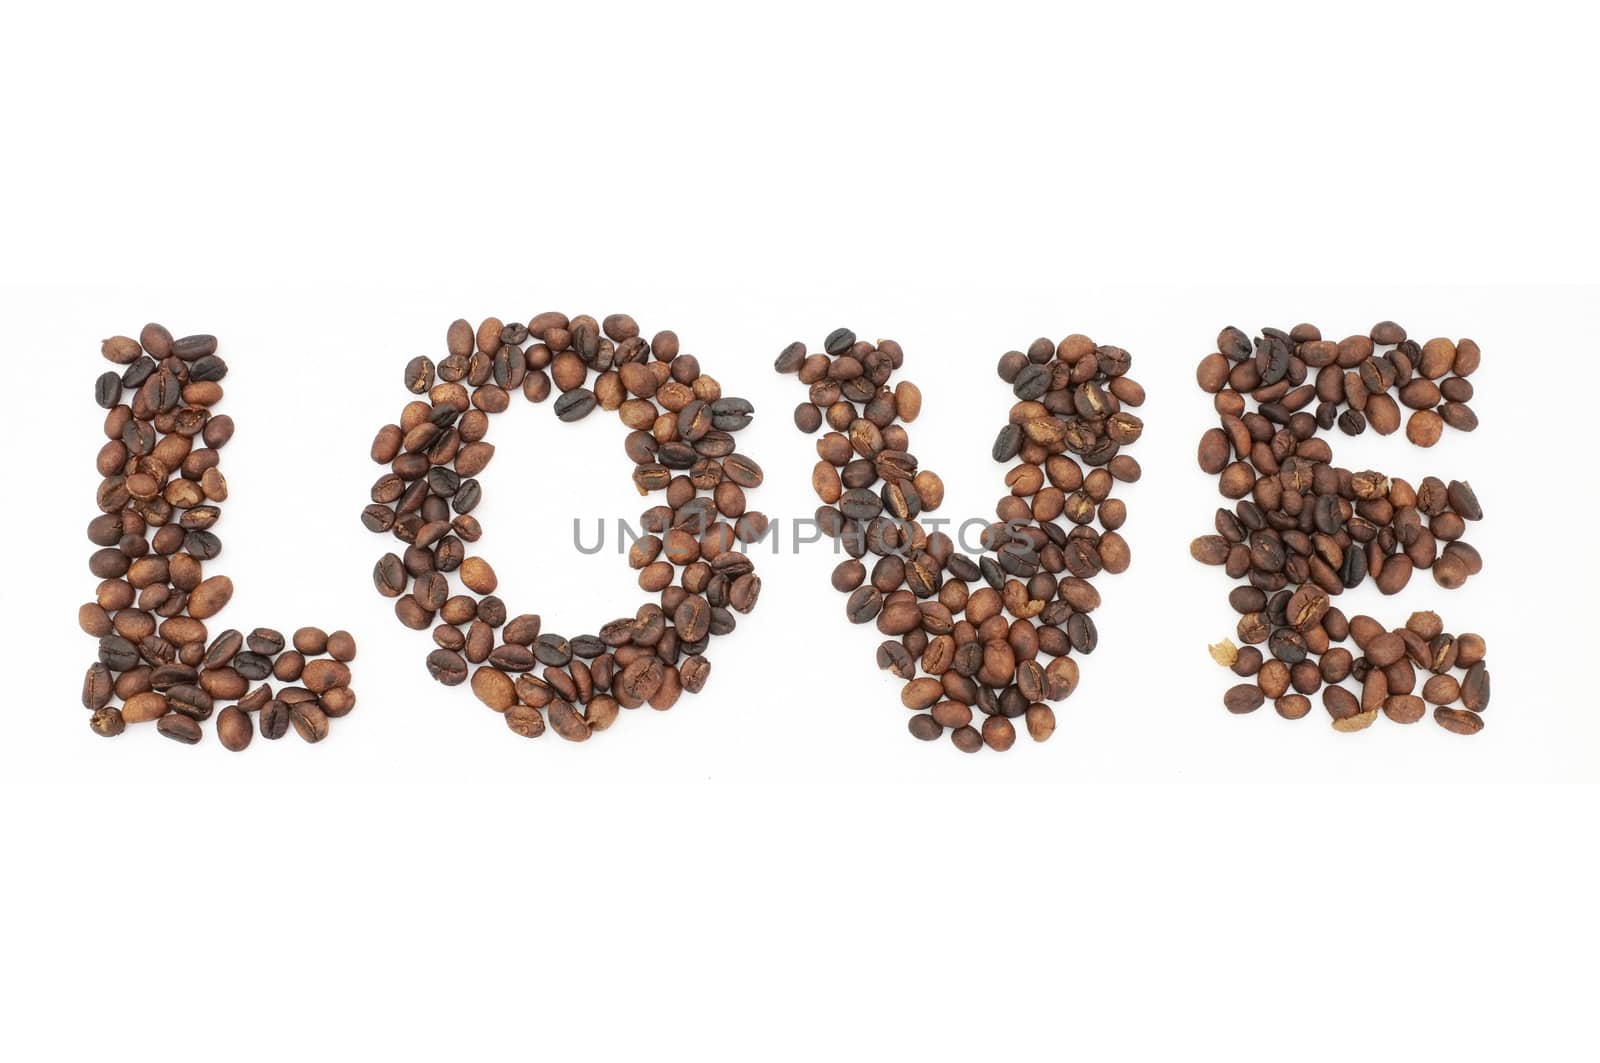 Roasted coffee beans in shape of alphabets, i love coffee by Hepjam